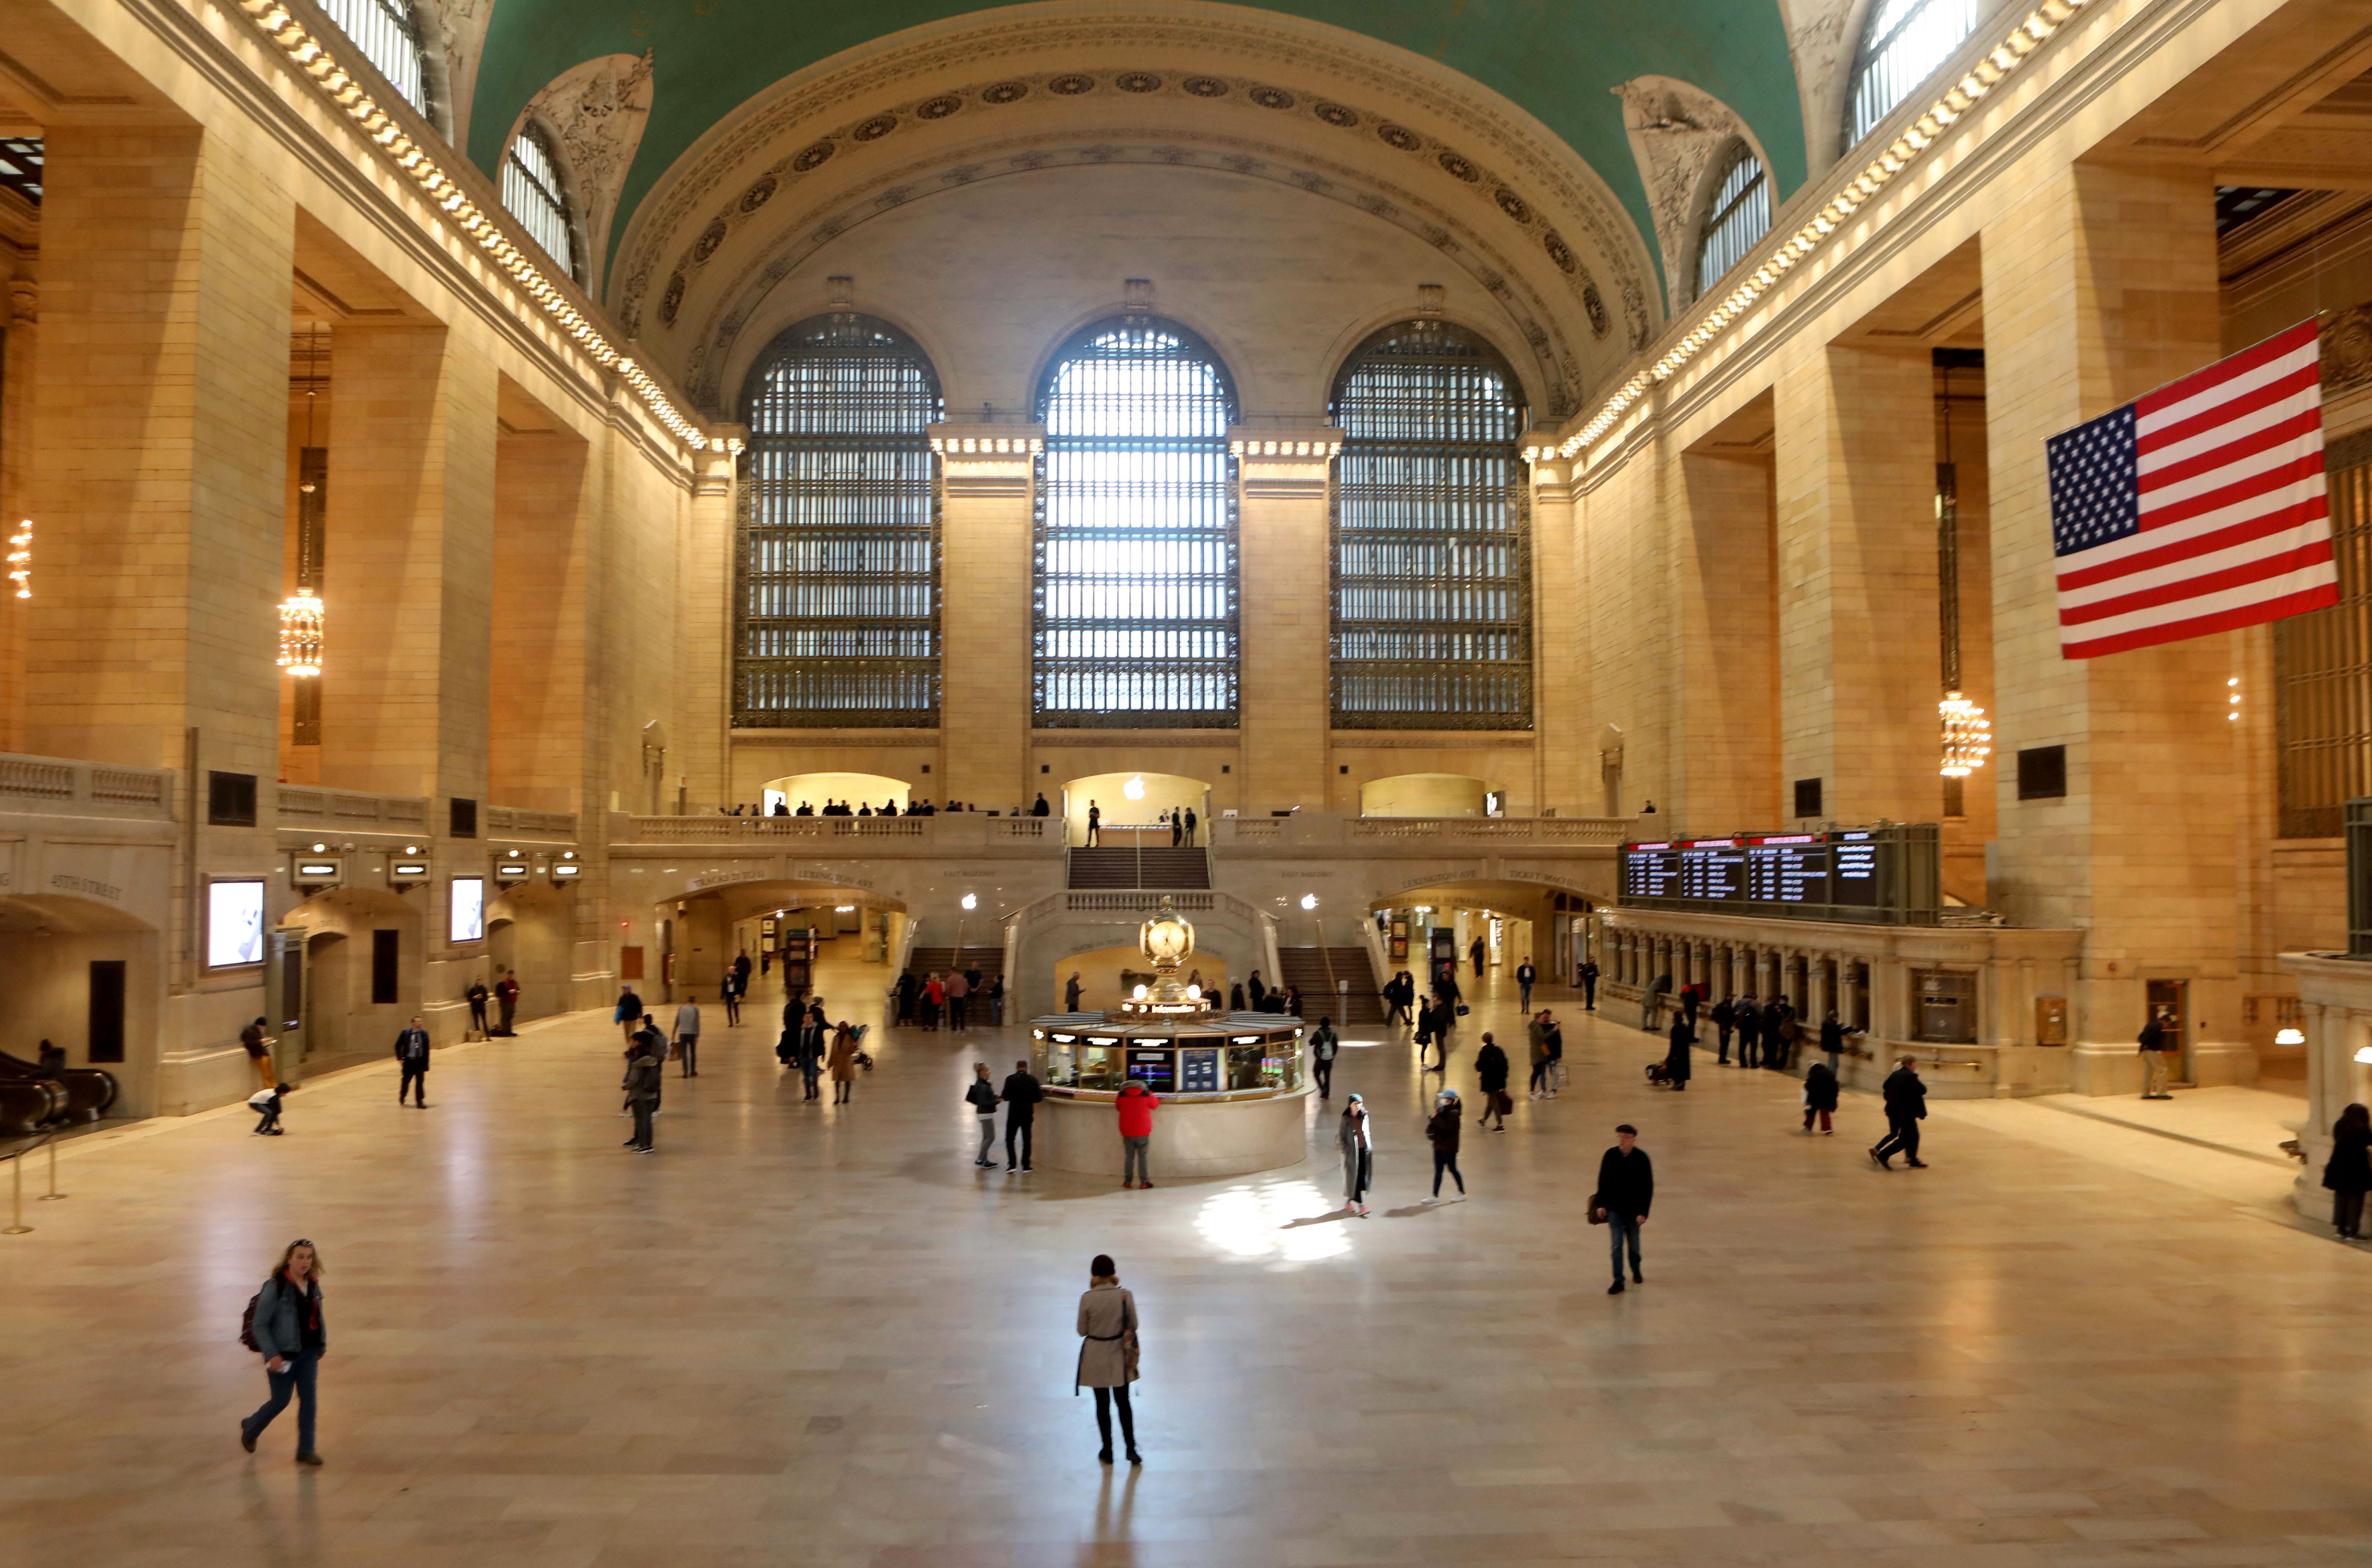 Even for a typically slow Sunday afternoon, Grand Central Terminal in New York City was quieter than usual March 15, 2020, as coronavirus concerns kept travelers and tourists off the streets and away from popular destinations in the city.